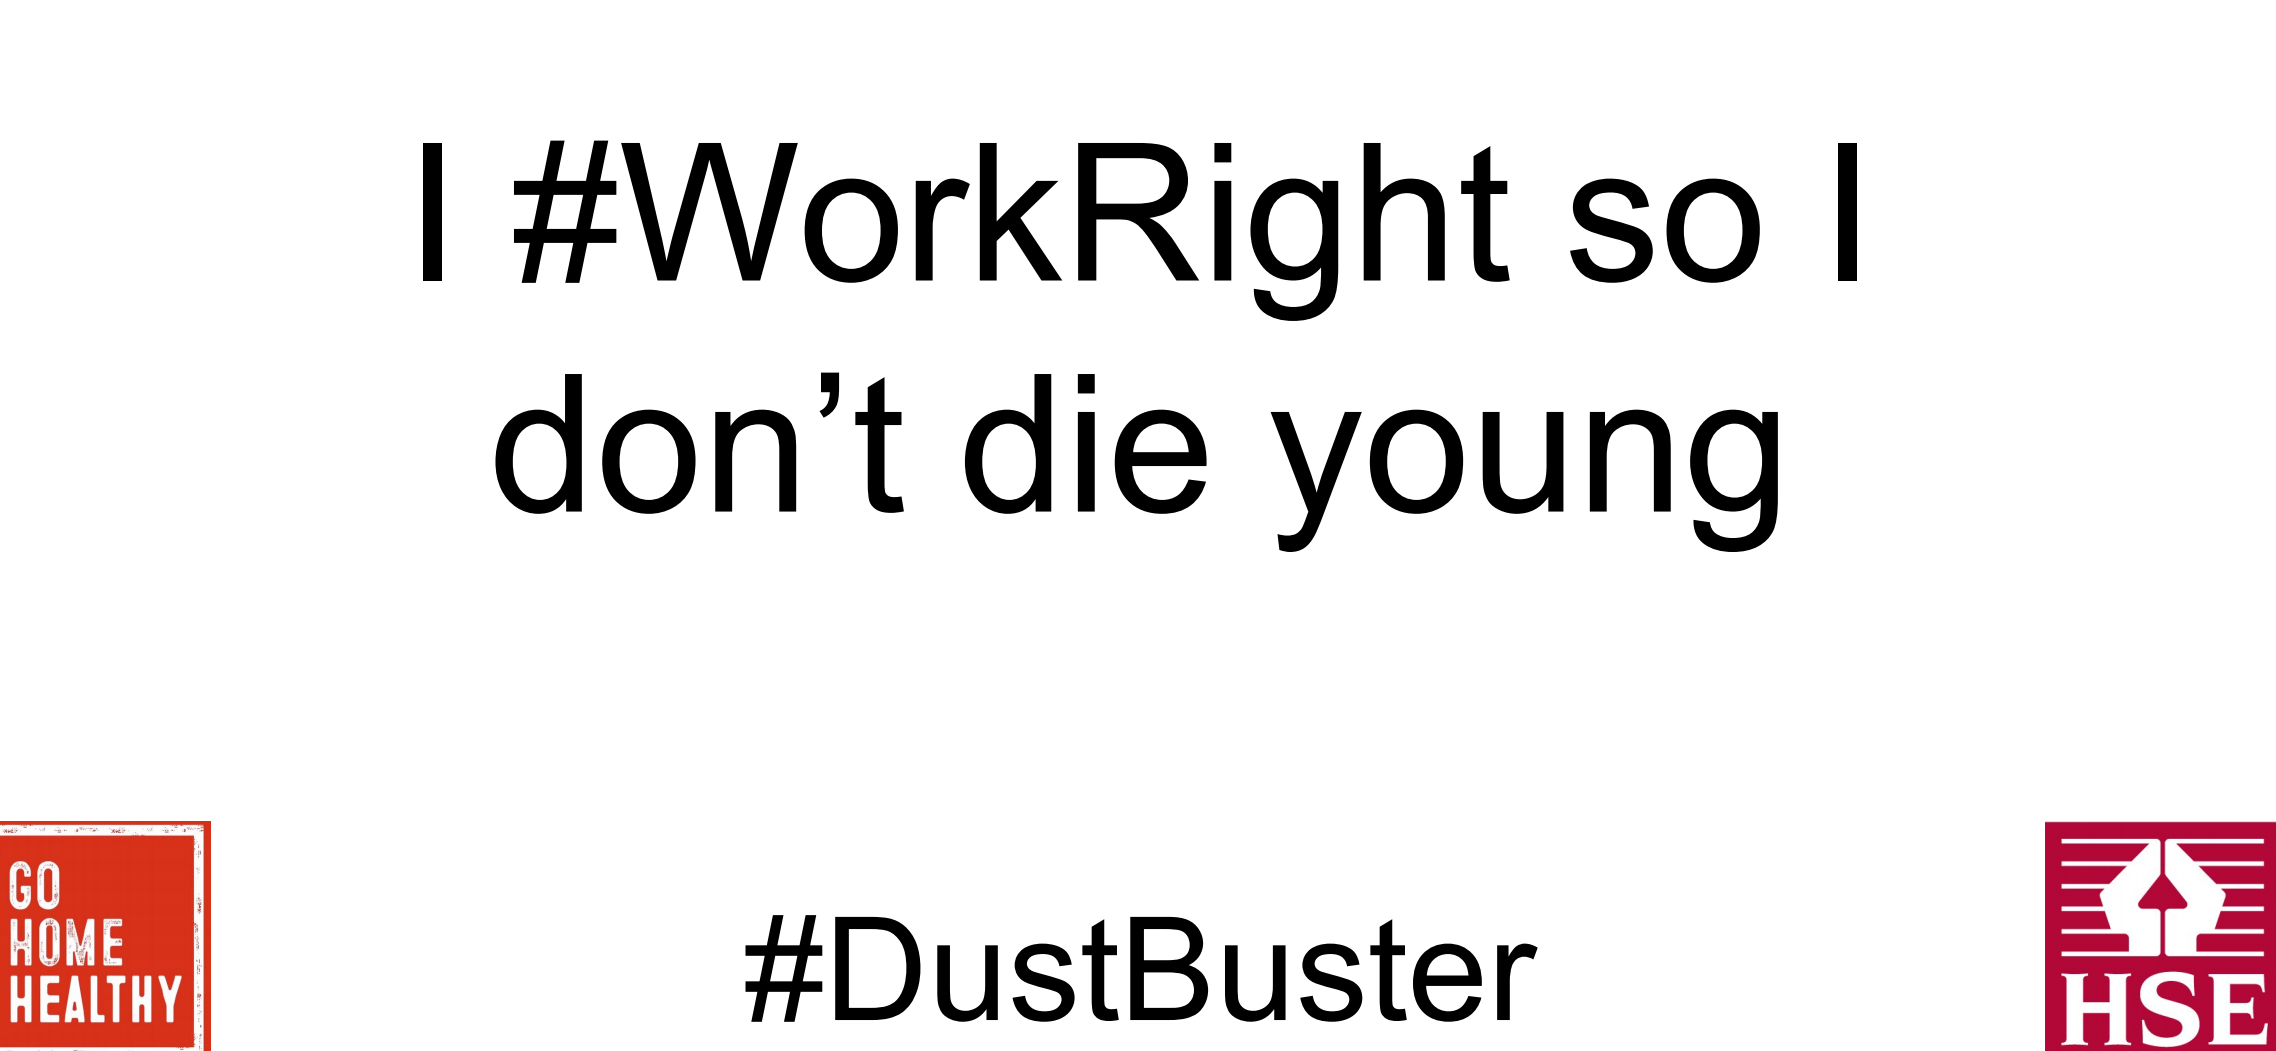 image is a HSE campaign poster for the #dustbuster initiative